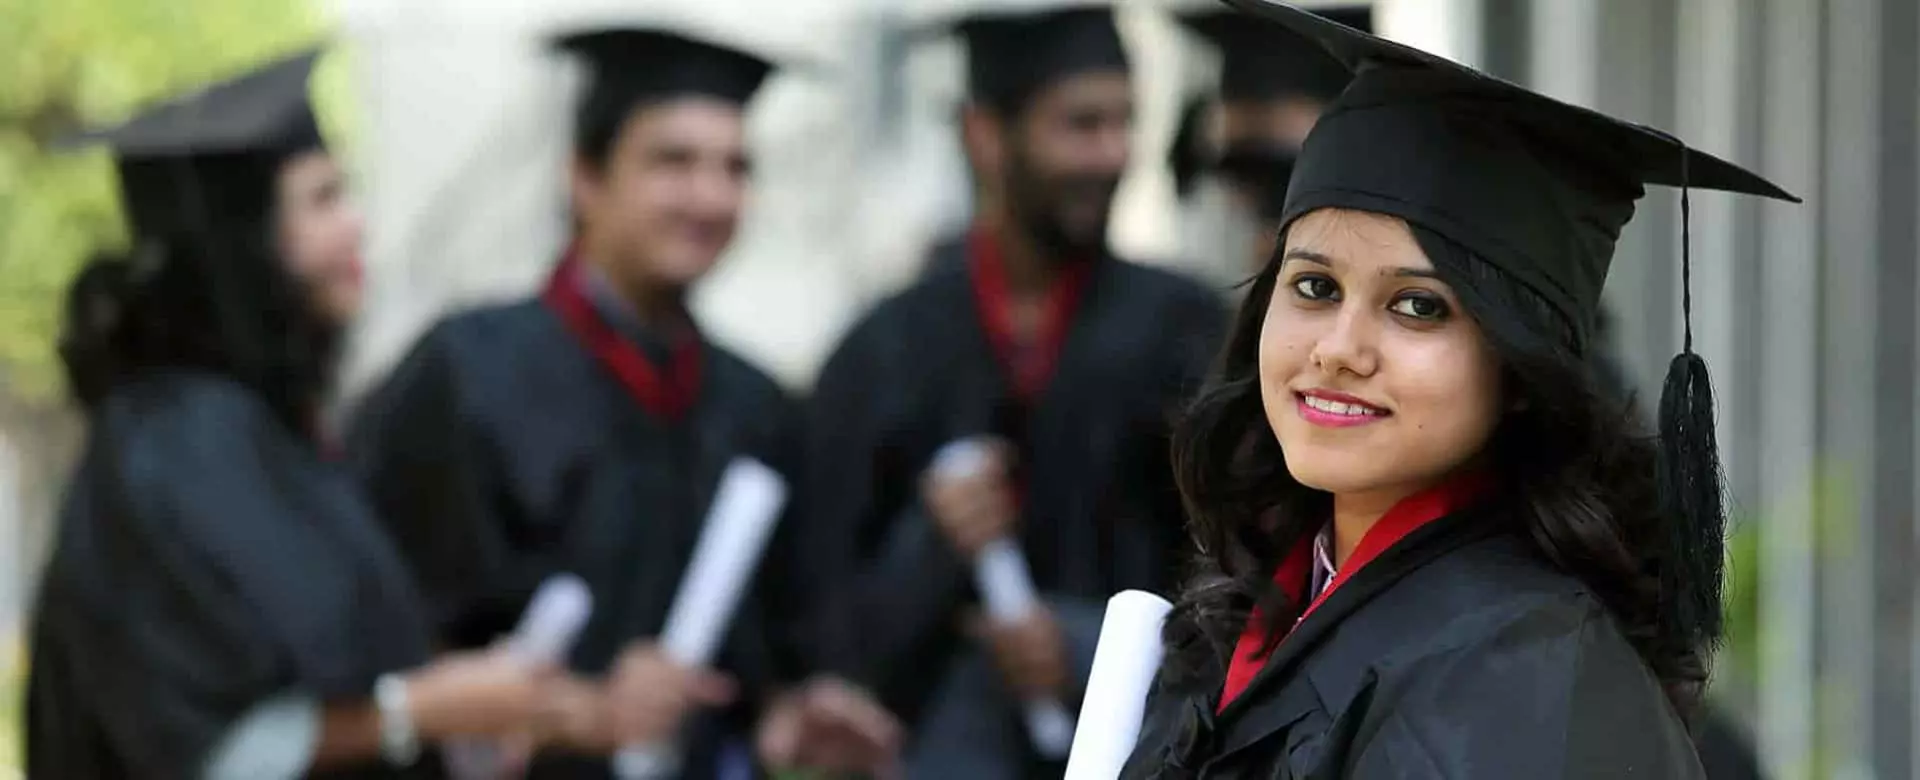 Average salary package for PGDM graduates in India